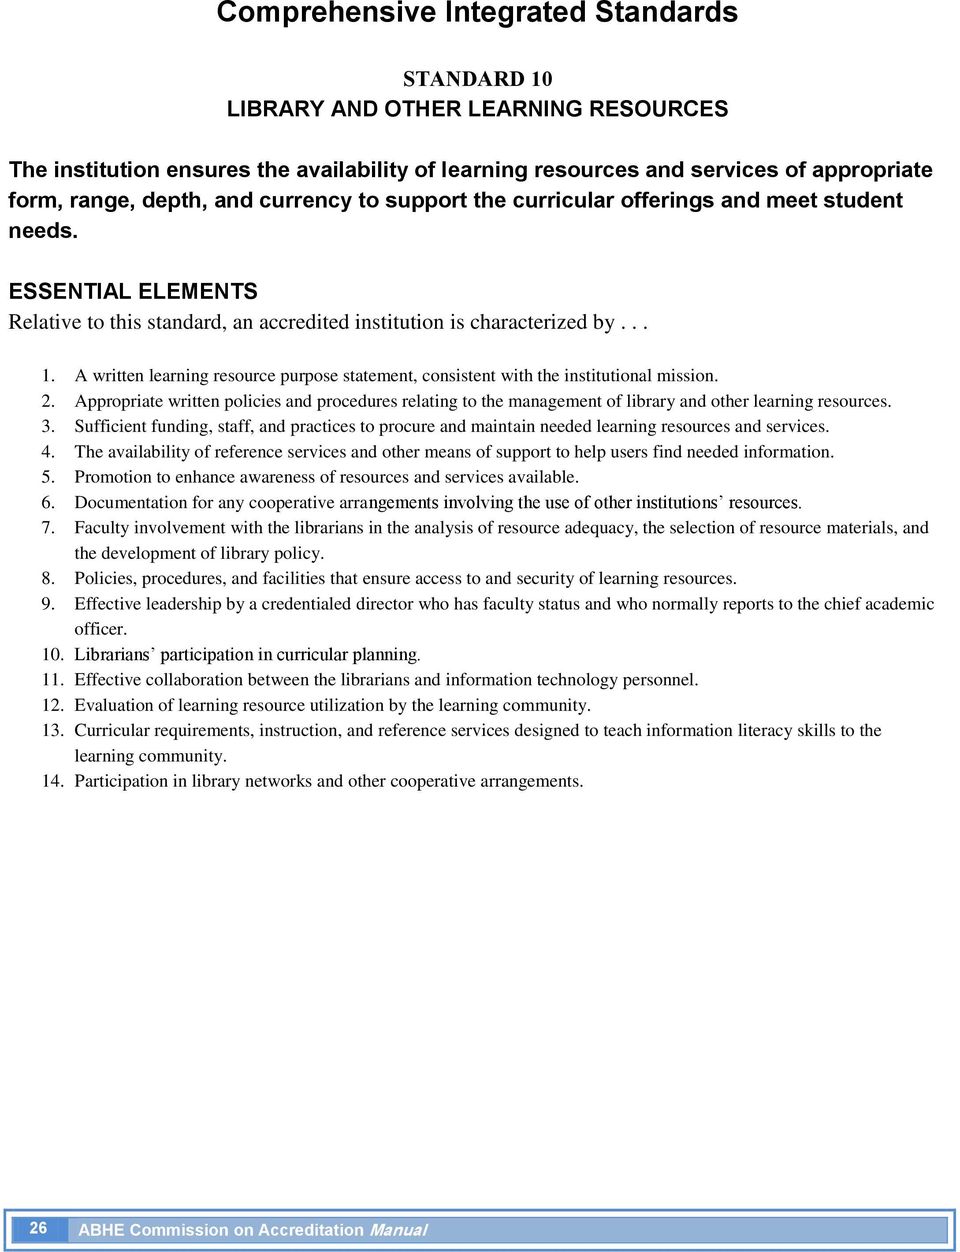 Appropriate written policies and procedures relating to the management of library and other learning resources. 3.